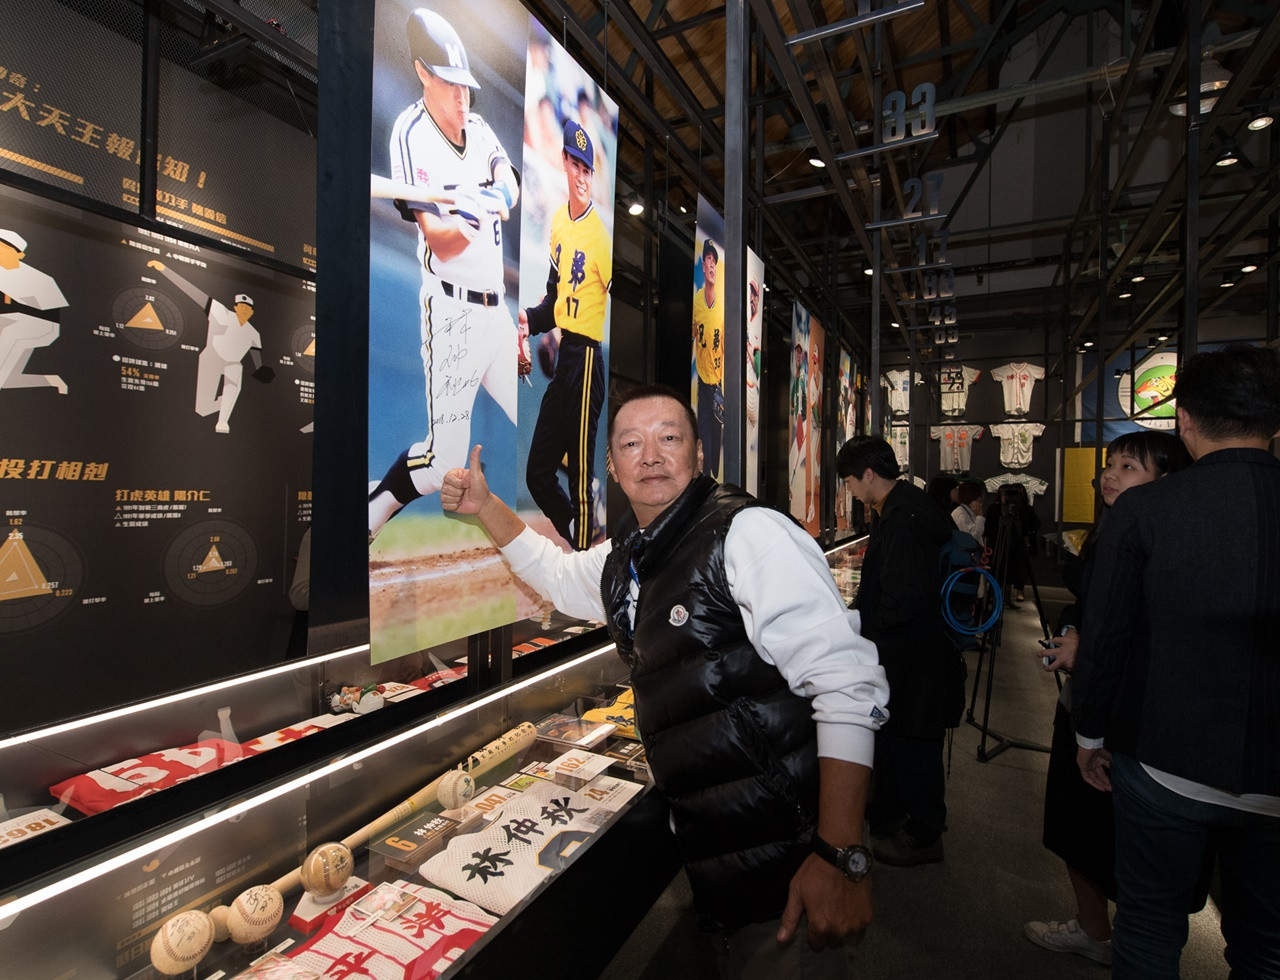 Chinese Professional Baseball League opens exhibition to celebrate 30th anniversary 